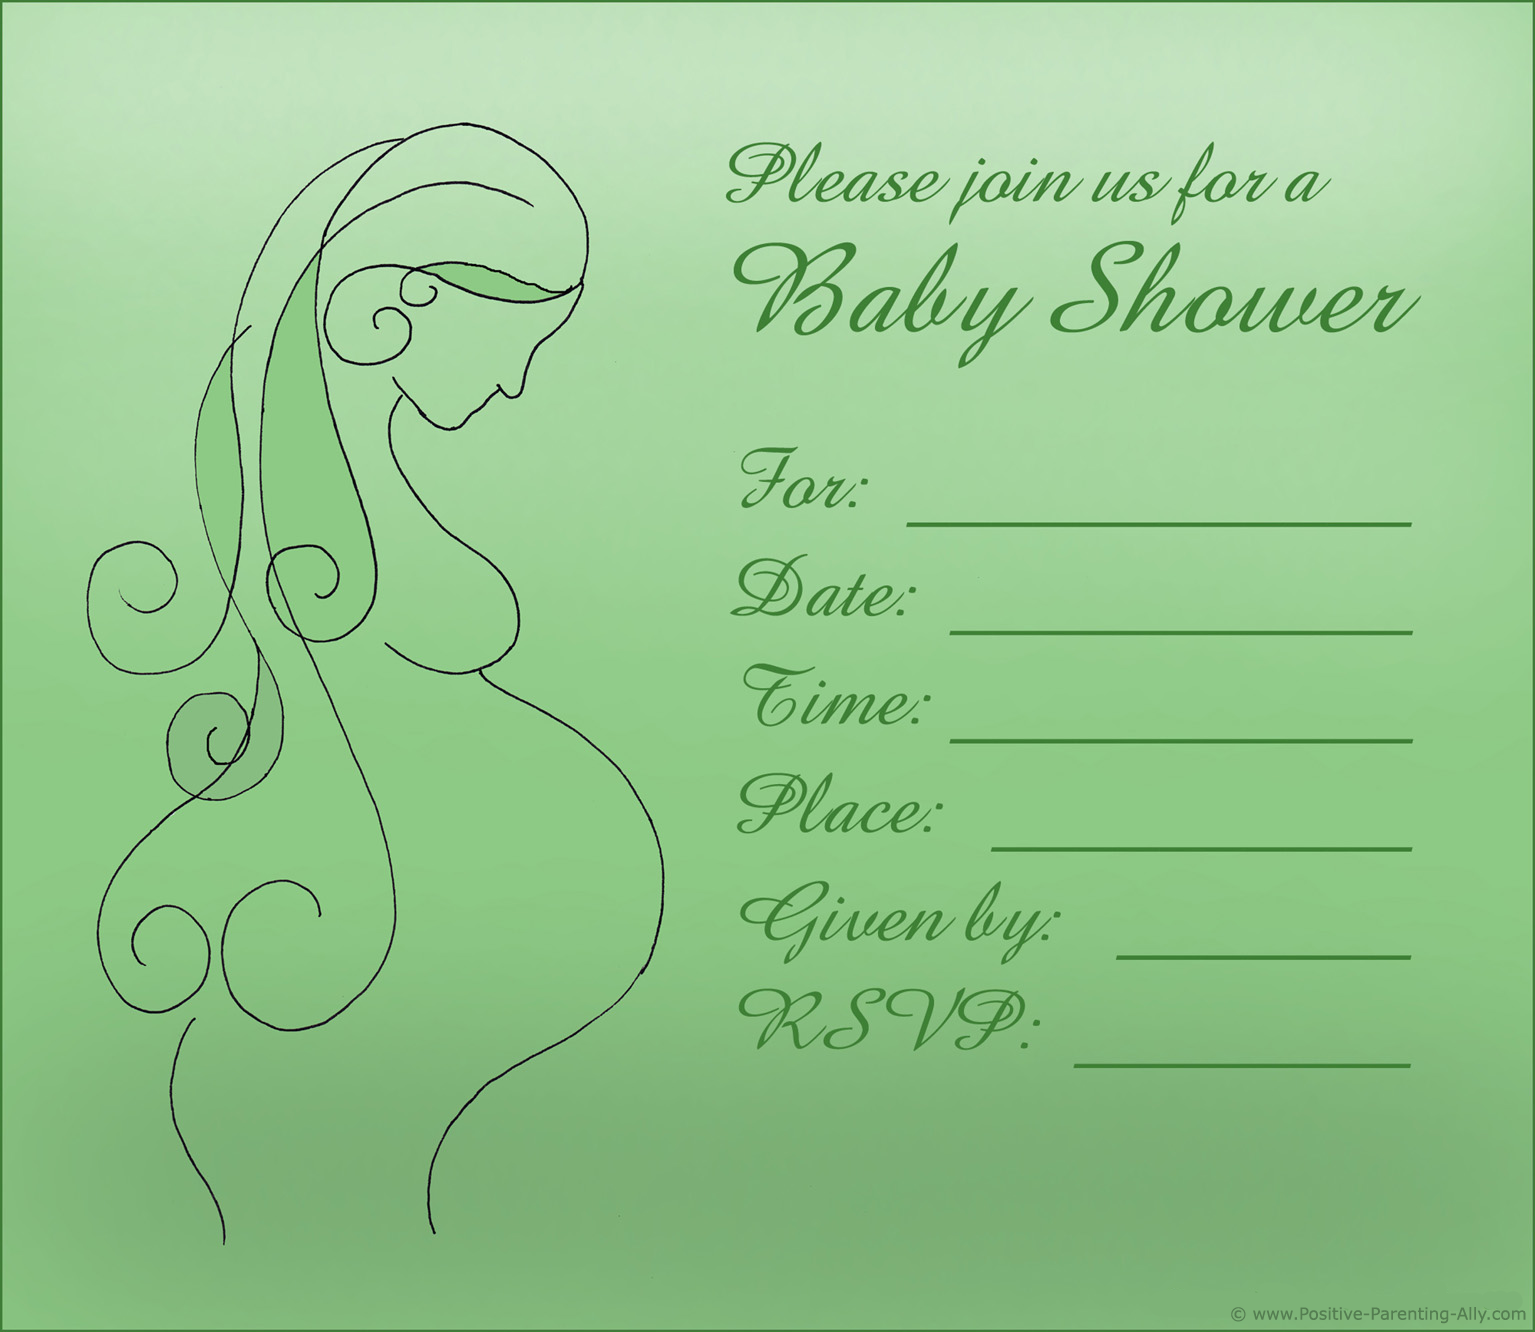 Free baby shower invitation template: Contour or silhouette of pregnant woman on green background.